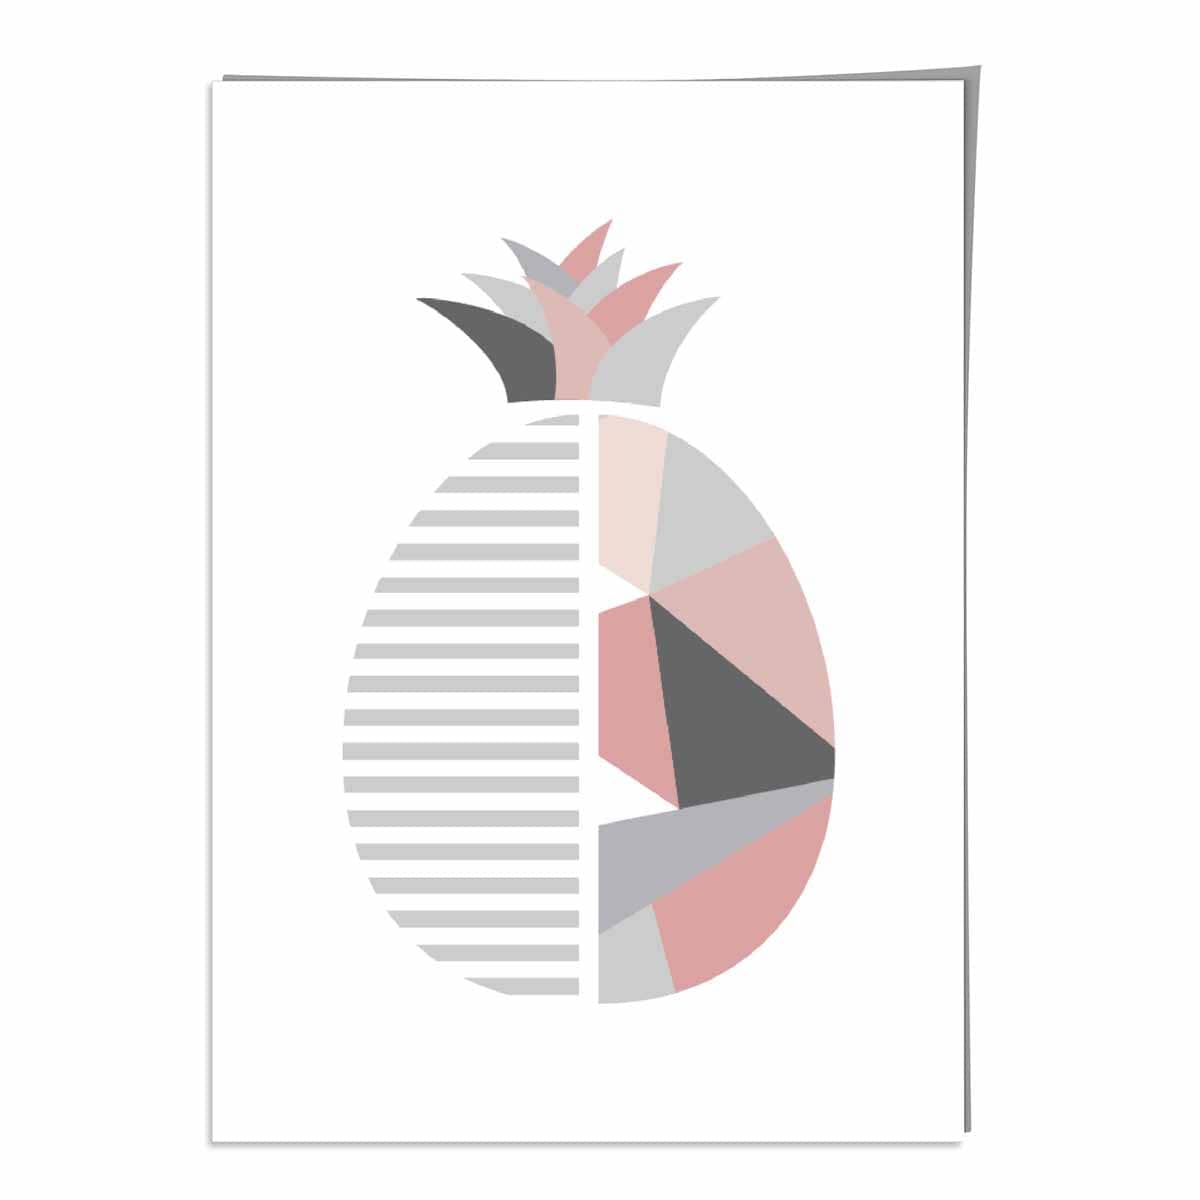 Geometric Fruit Poster of a Pineapple in Blush Pink and Grey